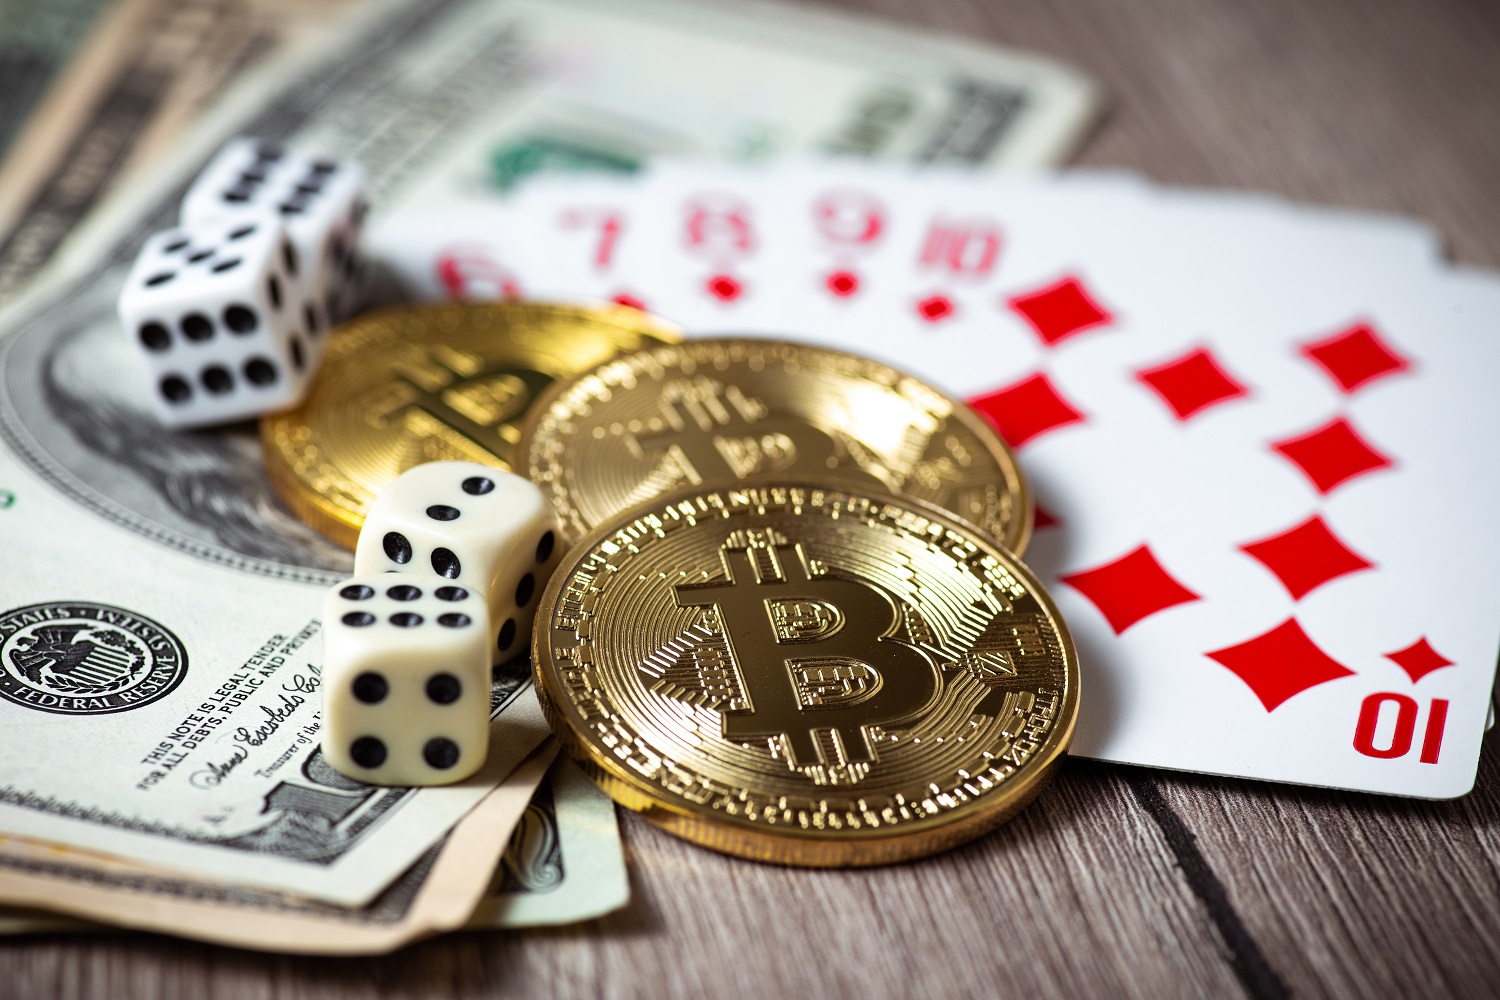 Three tokens intended to represent Bitcoin, along with playing cards, dice, and banknotes, on a wooden tabletop.